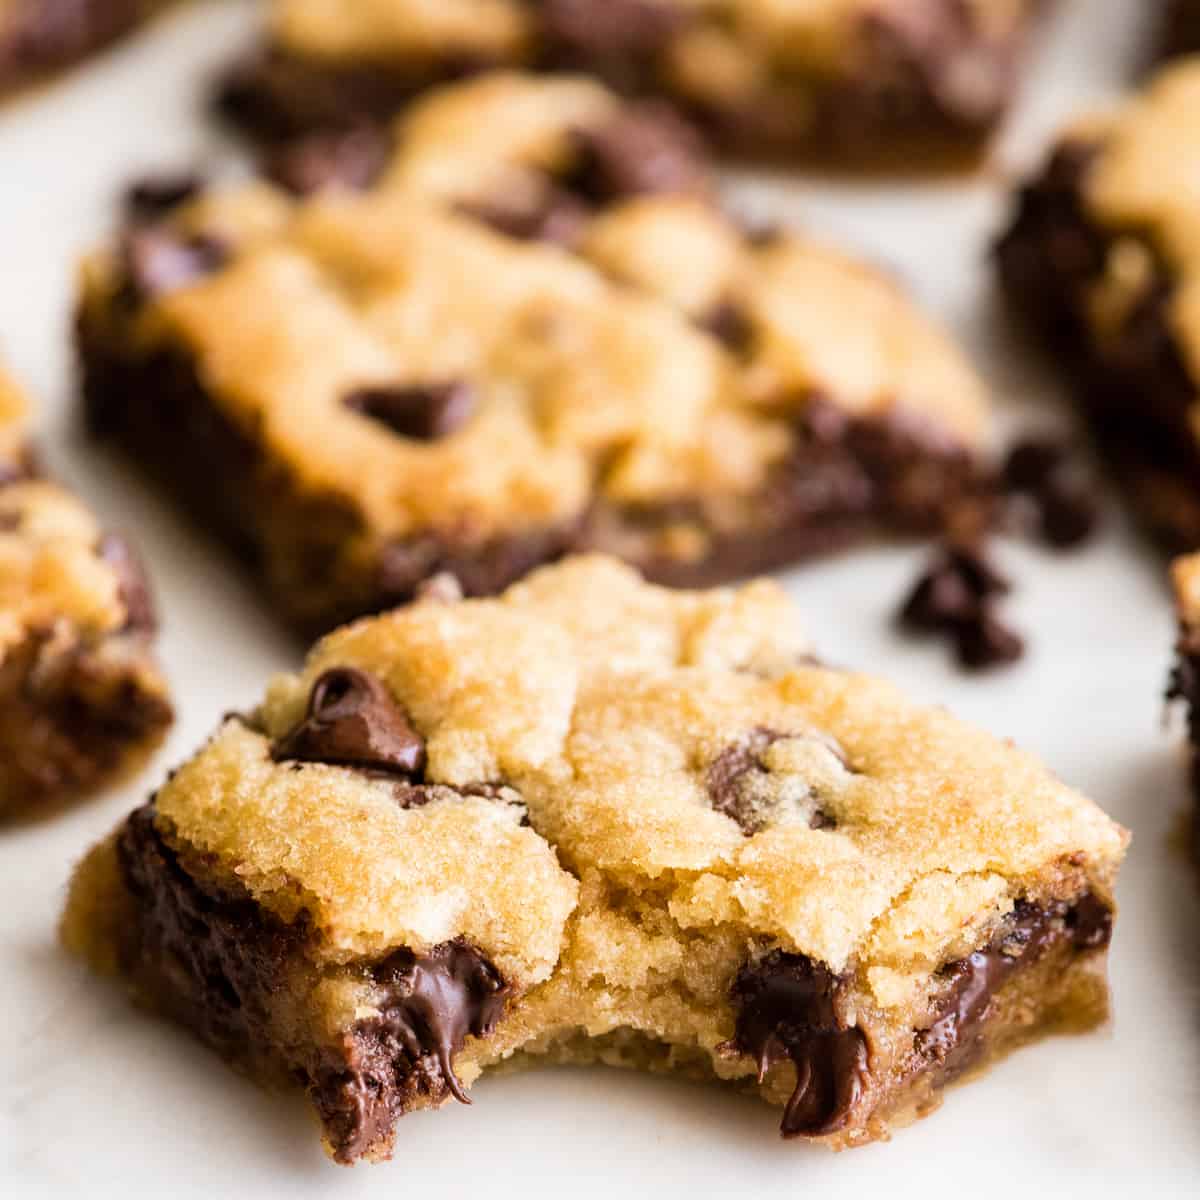 front view of a chocolate chip cookie bar with a bite taken out of it